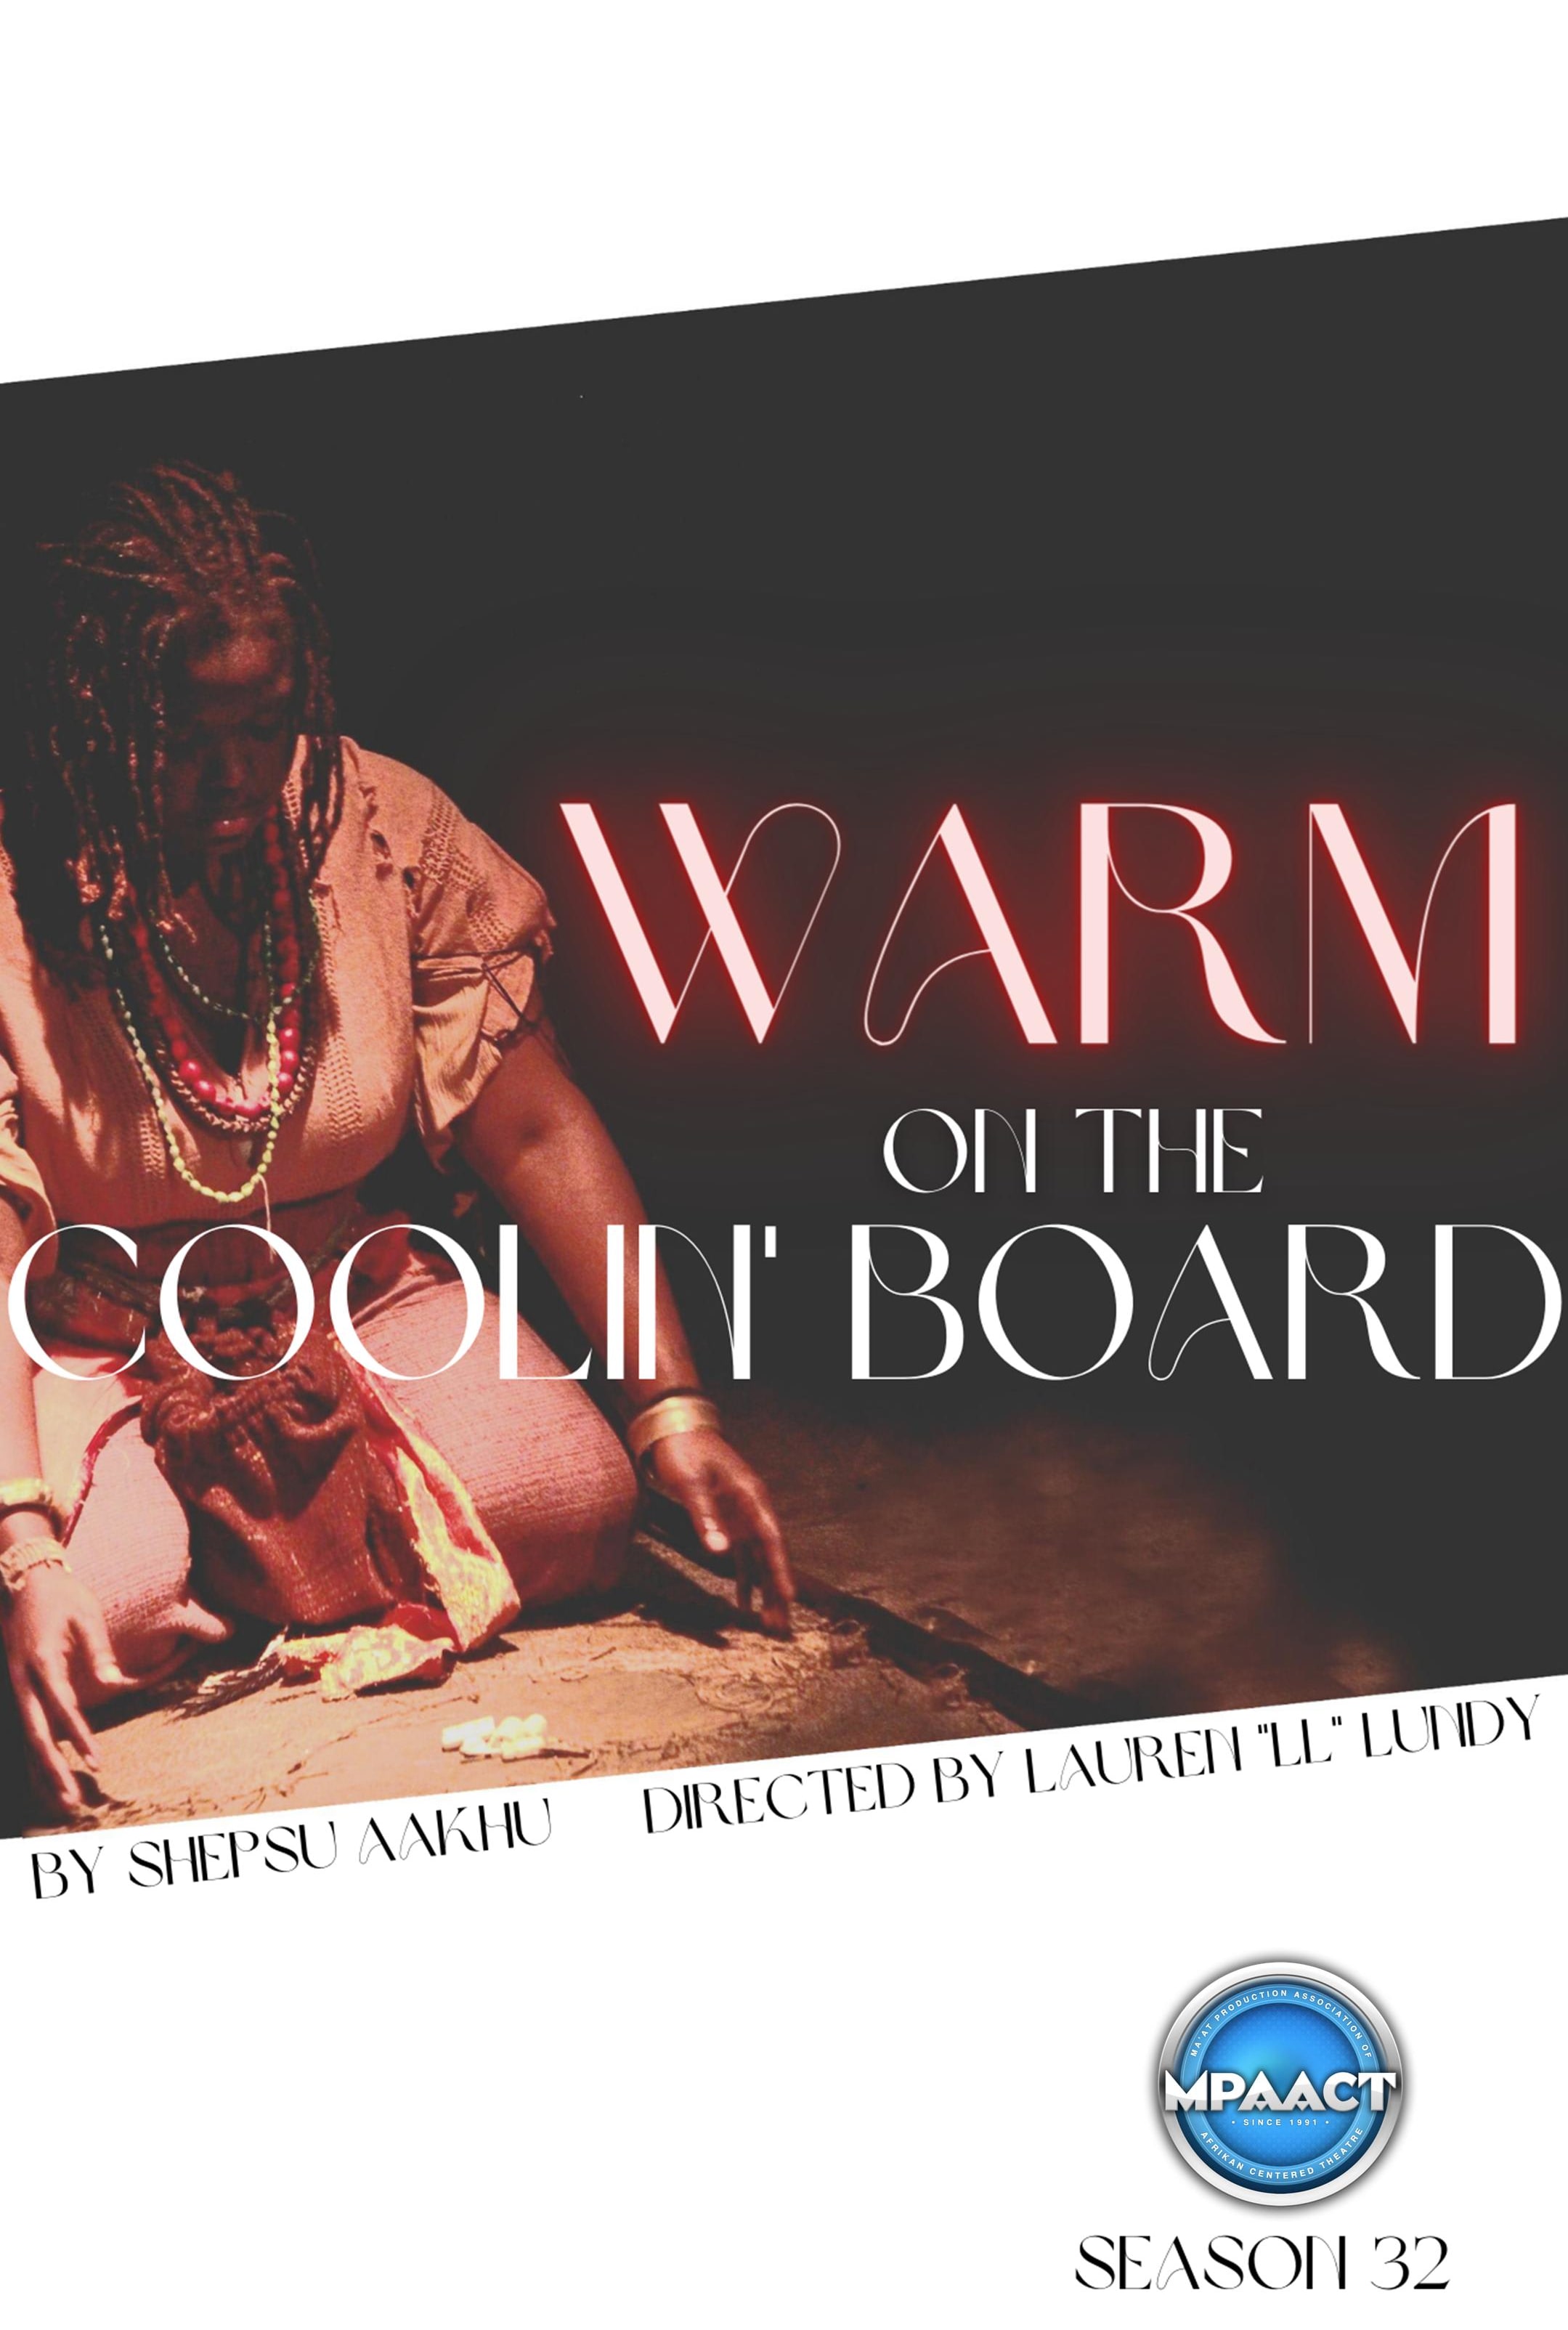 Warm on the Coolin' Board in Chicago